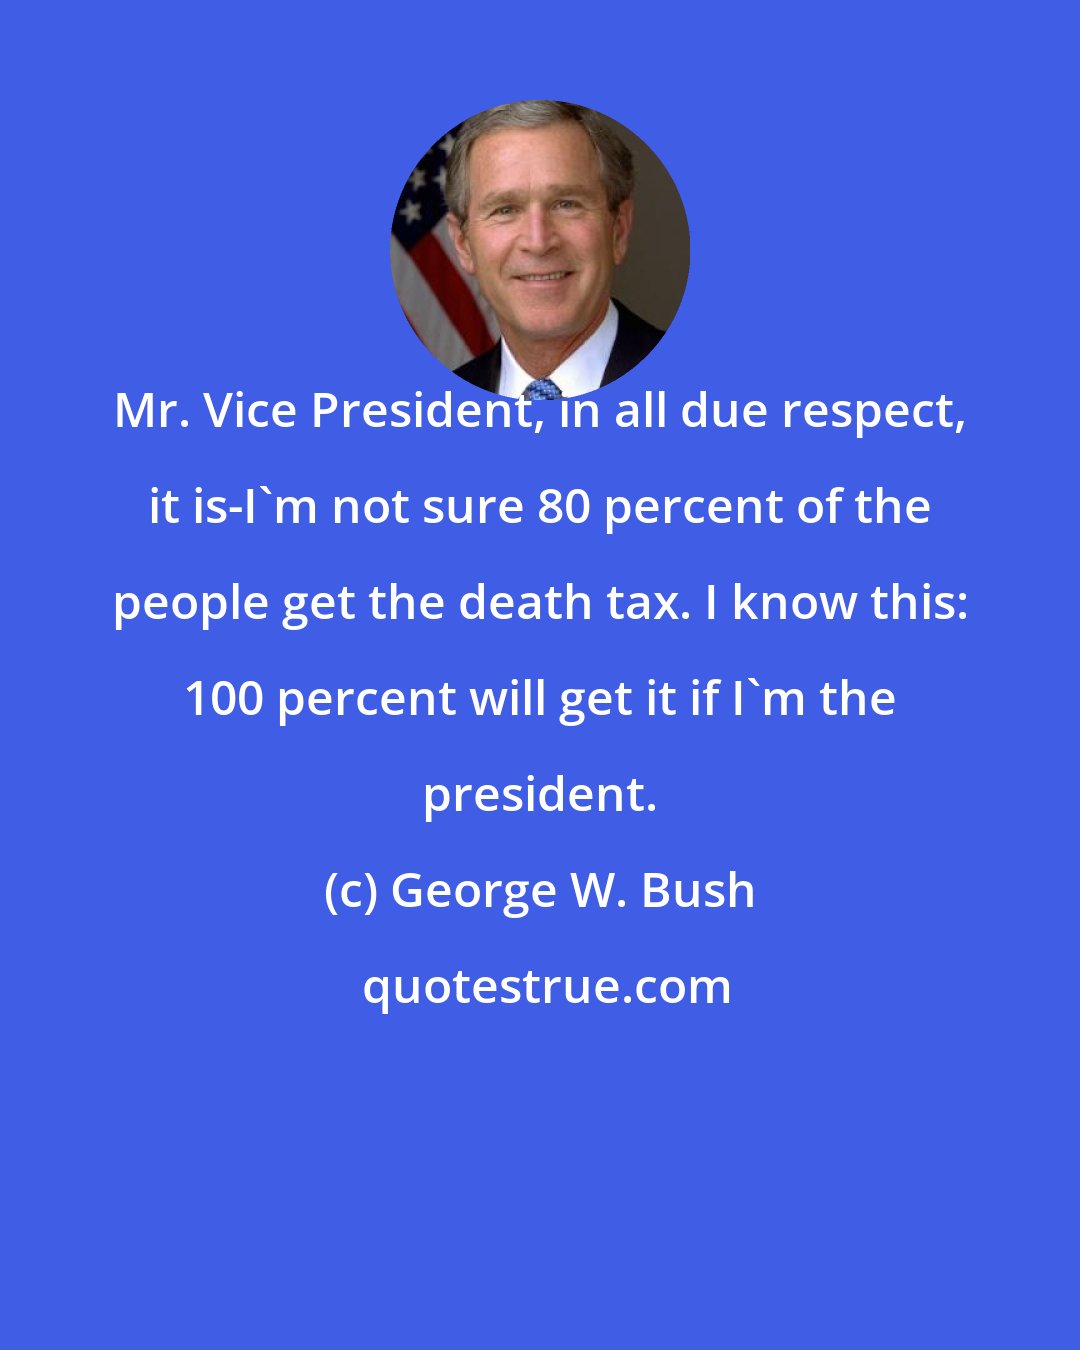 George W. Bush: Mr. Vice President, in all due respect, it is-I'm not sure 80 percent of the people get the death tax. I know this: 100 percent will get it if I'm the president.